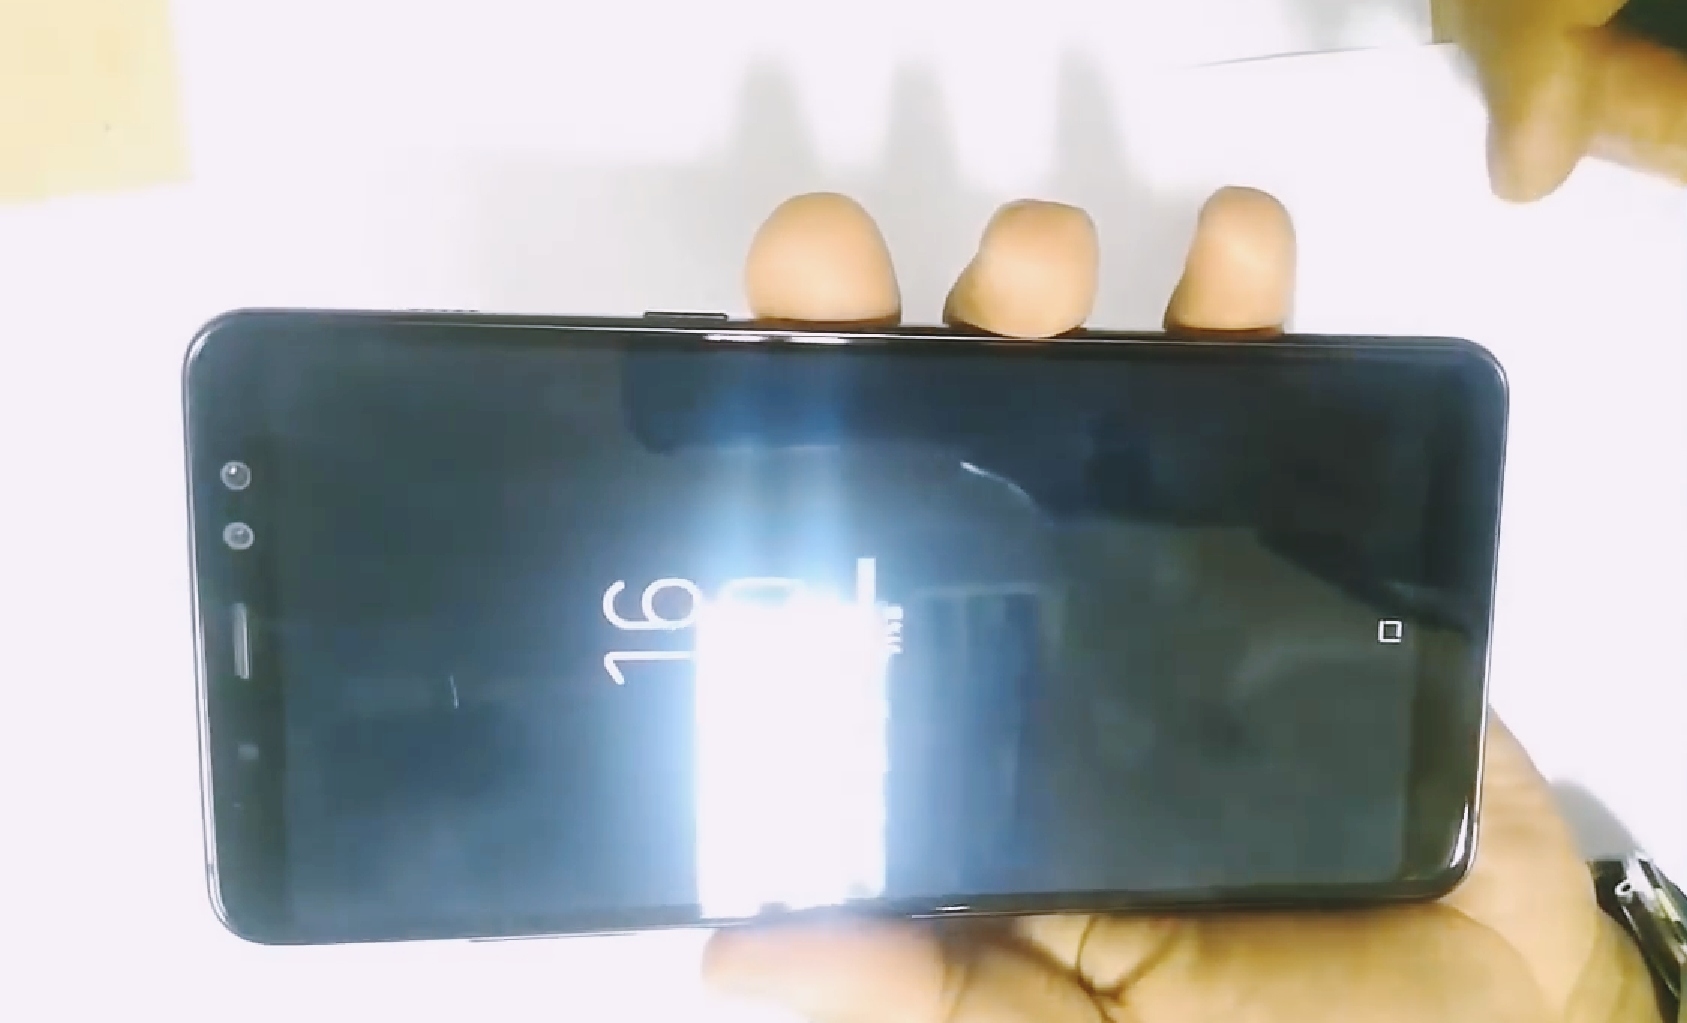 Samsung Galaxy A8+ Leaked In A Hands On Video